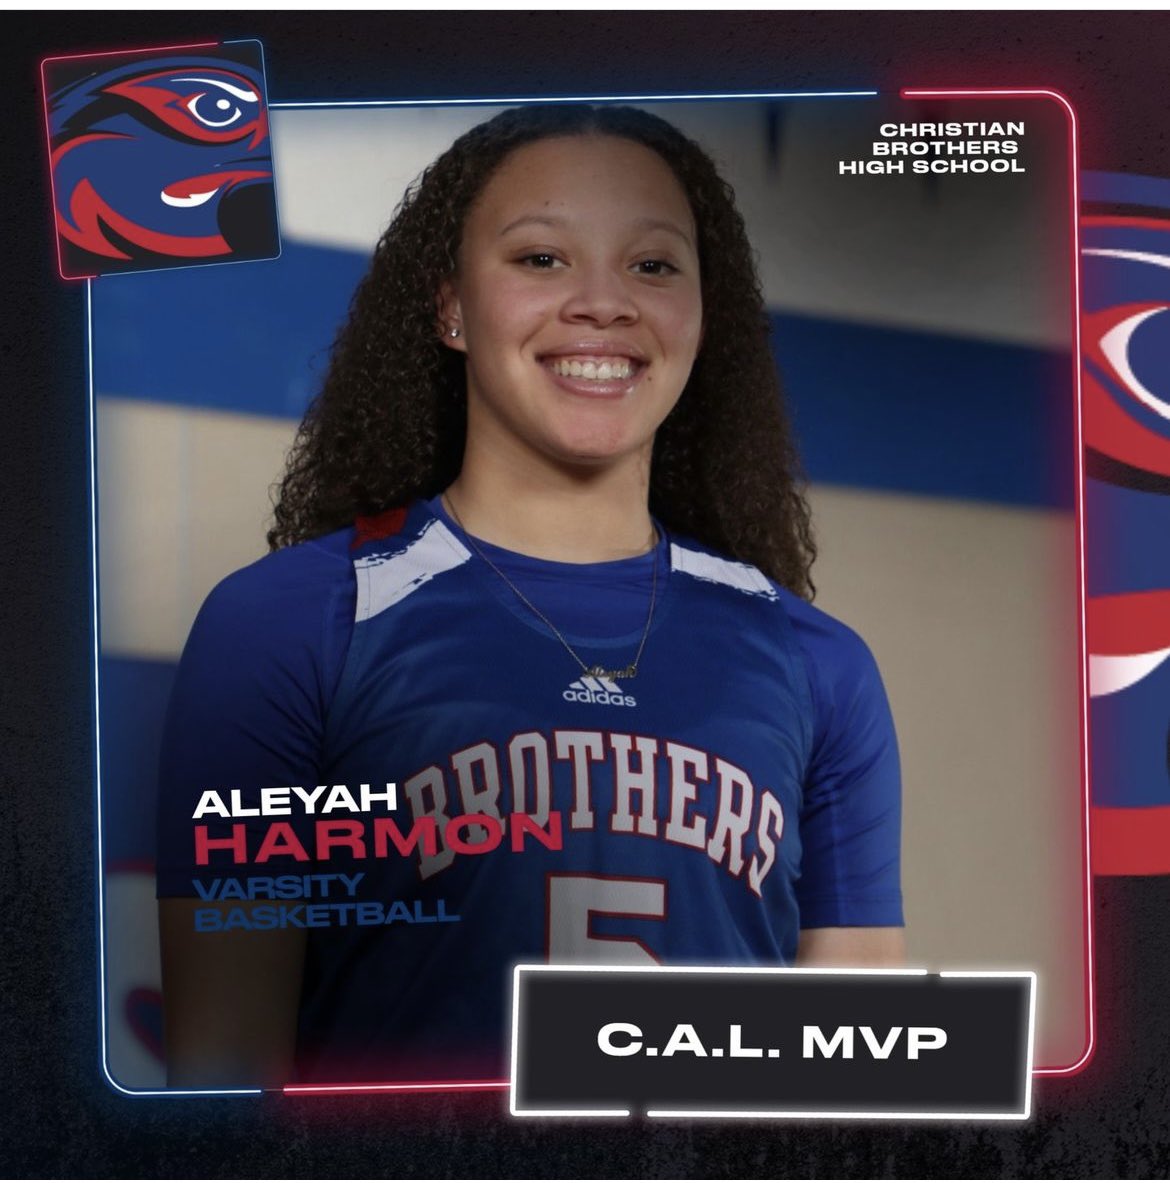 Player spotlight: Aleyah Harmon ⛹🏽‍♀️
The Junior was selected as the 2024 C.A.L League MVP. She averaged 16.5 ppg, 5.8 APG, and 3.3 SPG for the season. A wonderful teammate and outstanding player on and off the court. All while maintaining a 4.3 GPA. #123represent